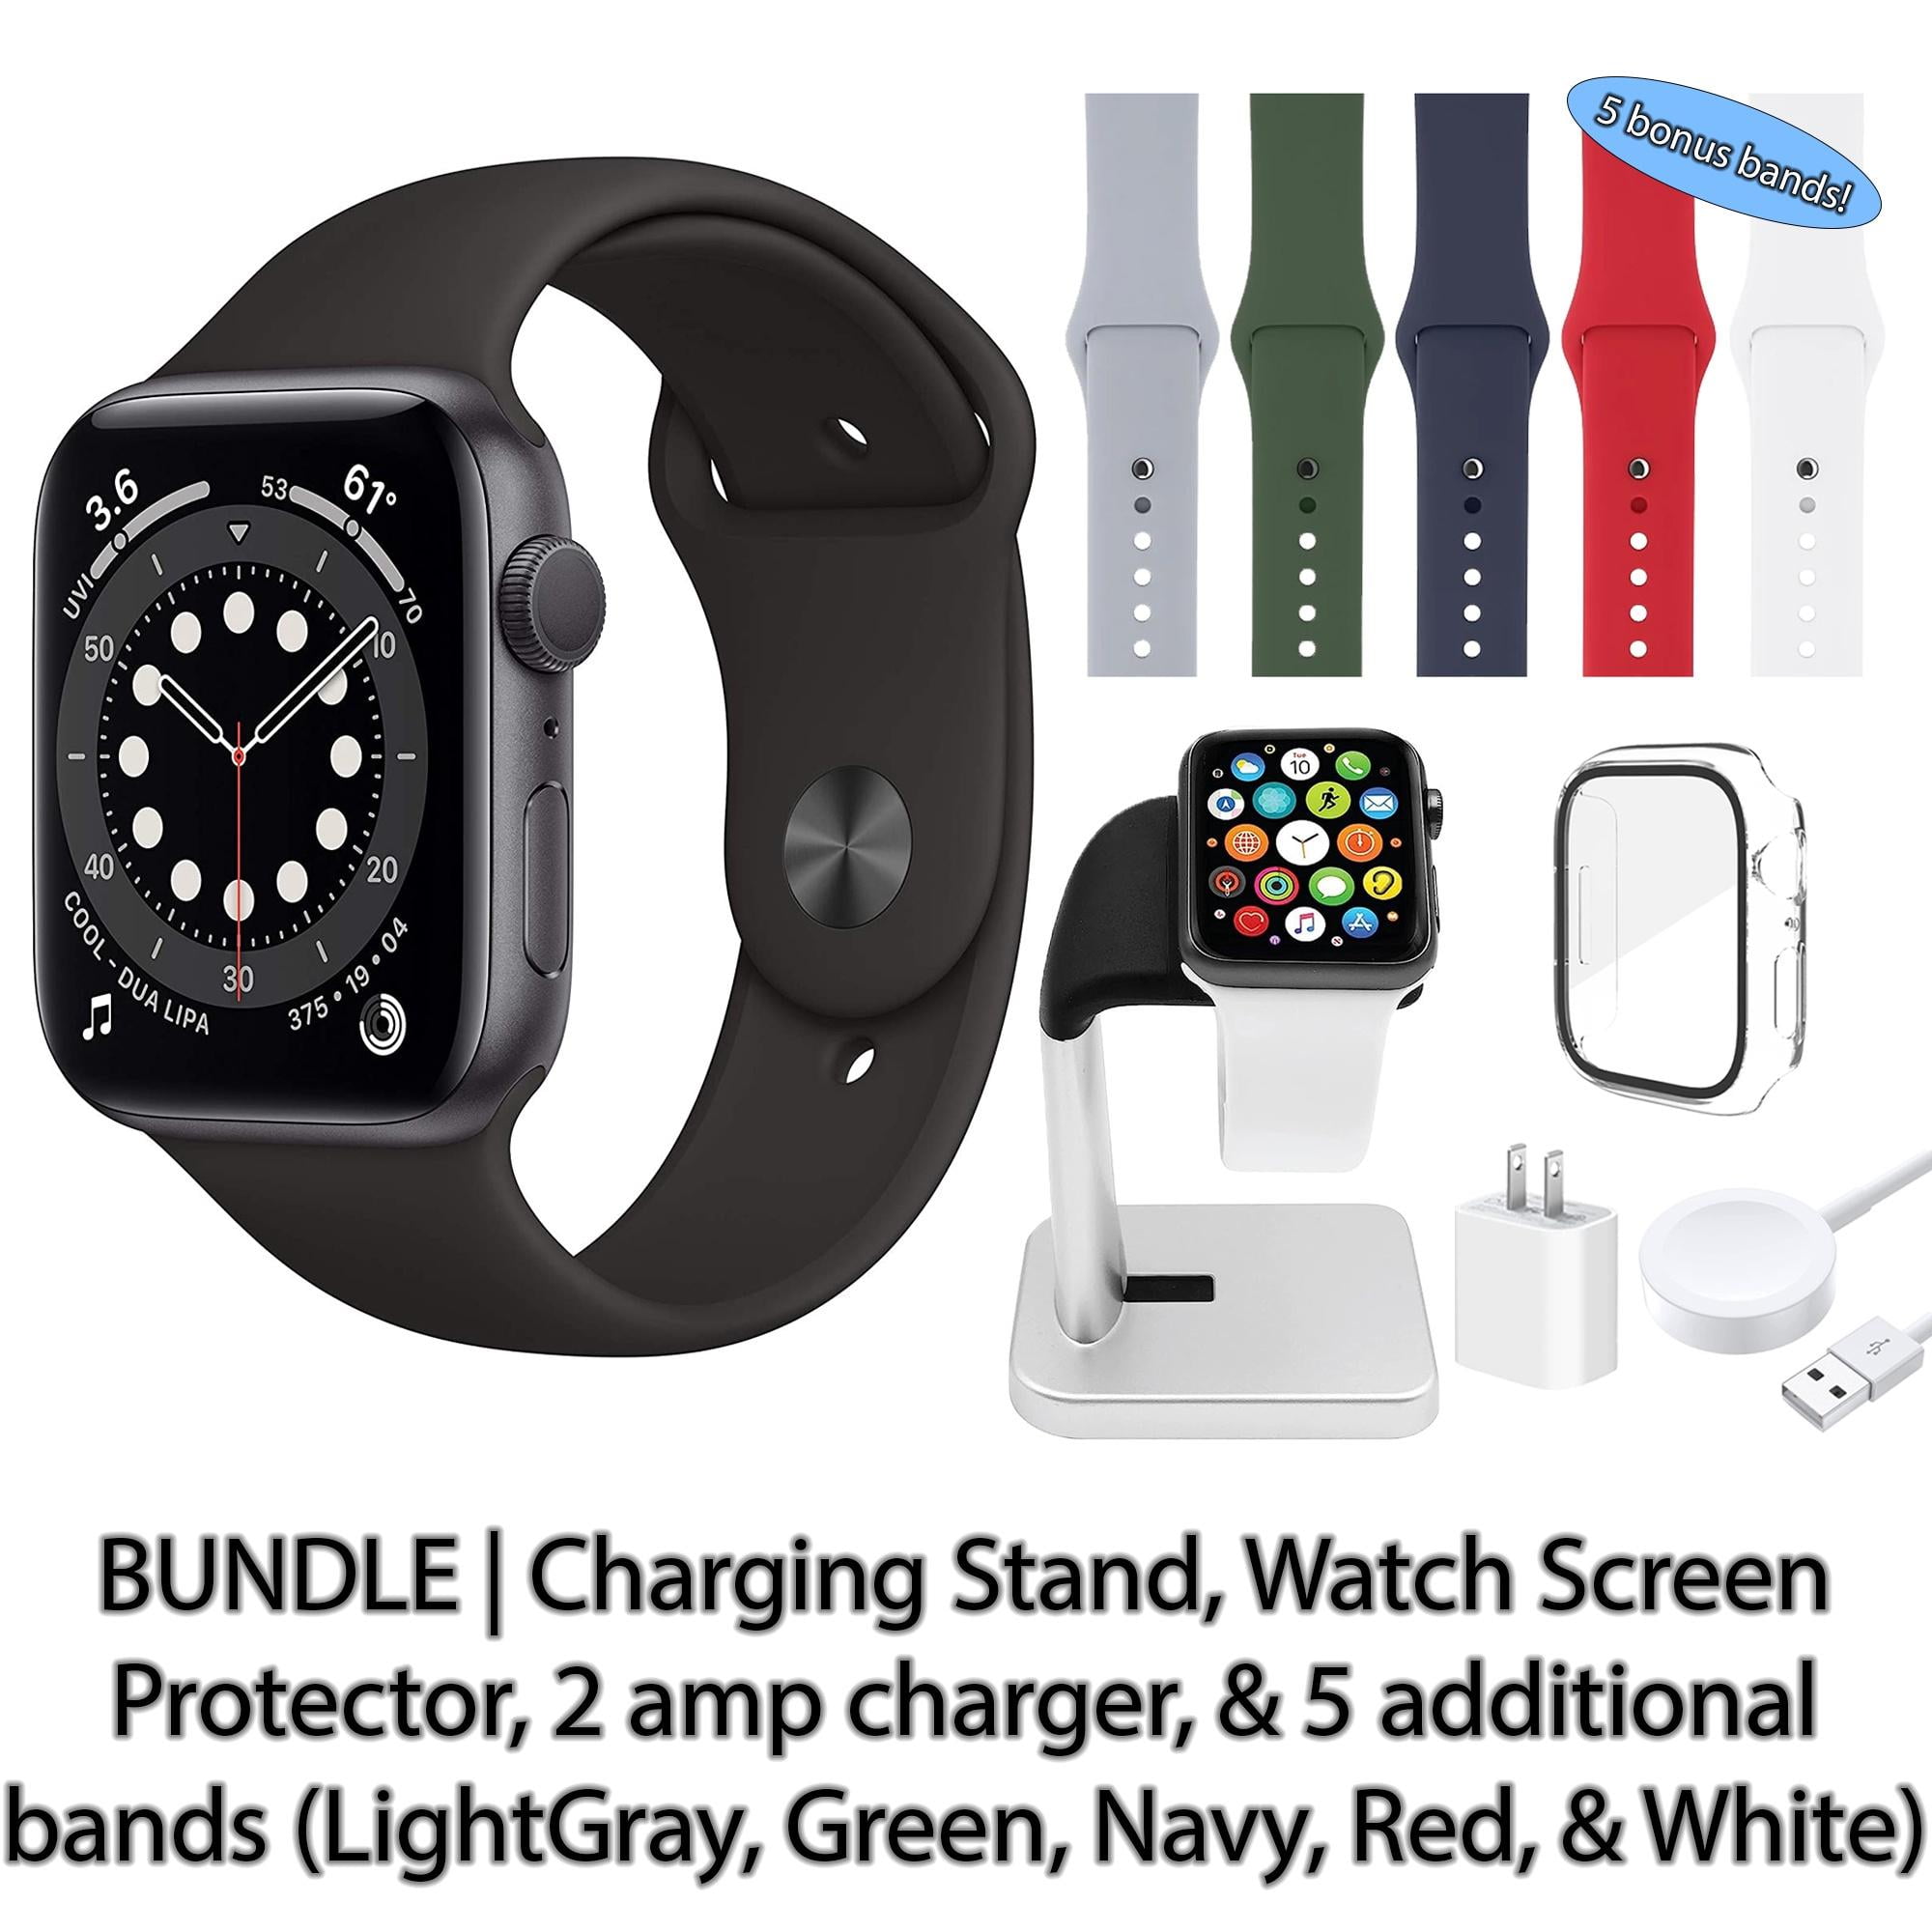 Restored Apple Watch Series 6 (GPS, 44 mm) Space Gray Aluminum Case with Black Sport Band 5 Bonus Bands, Charging Stand, Screen Protector, & 2 amp charger (Refurbished)